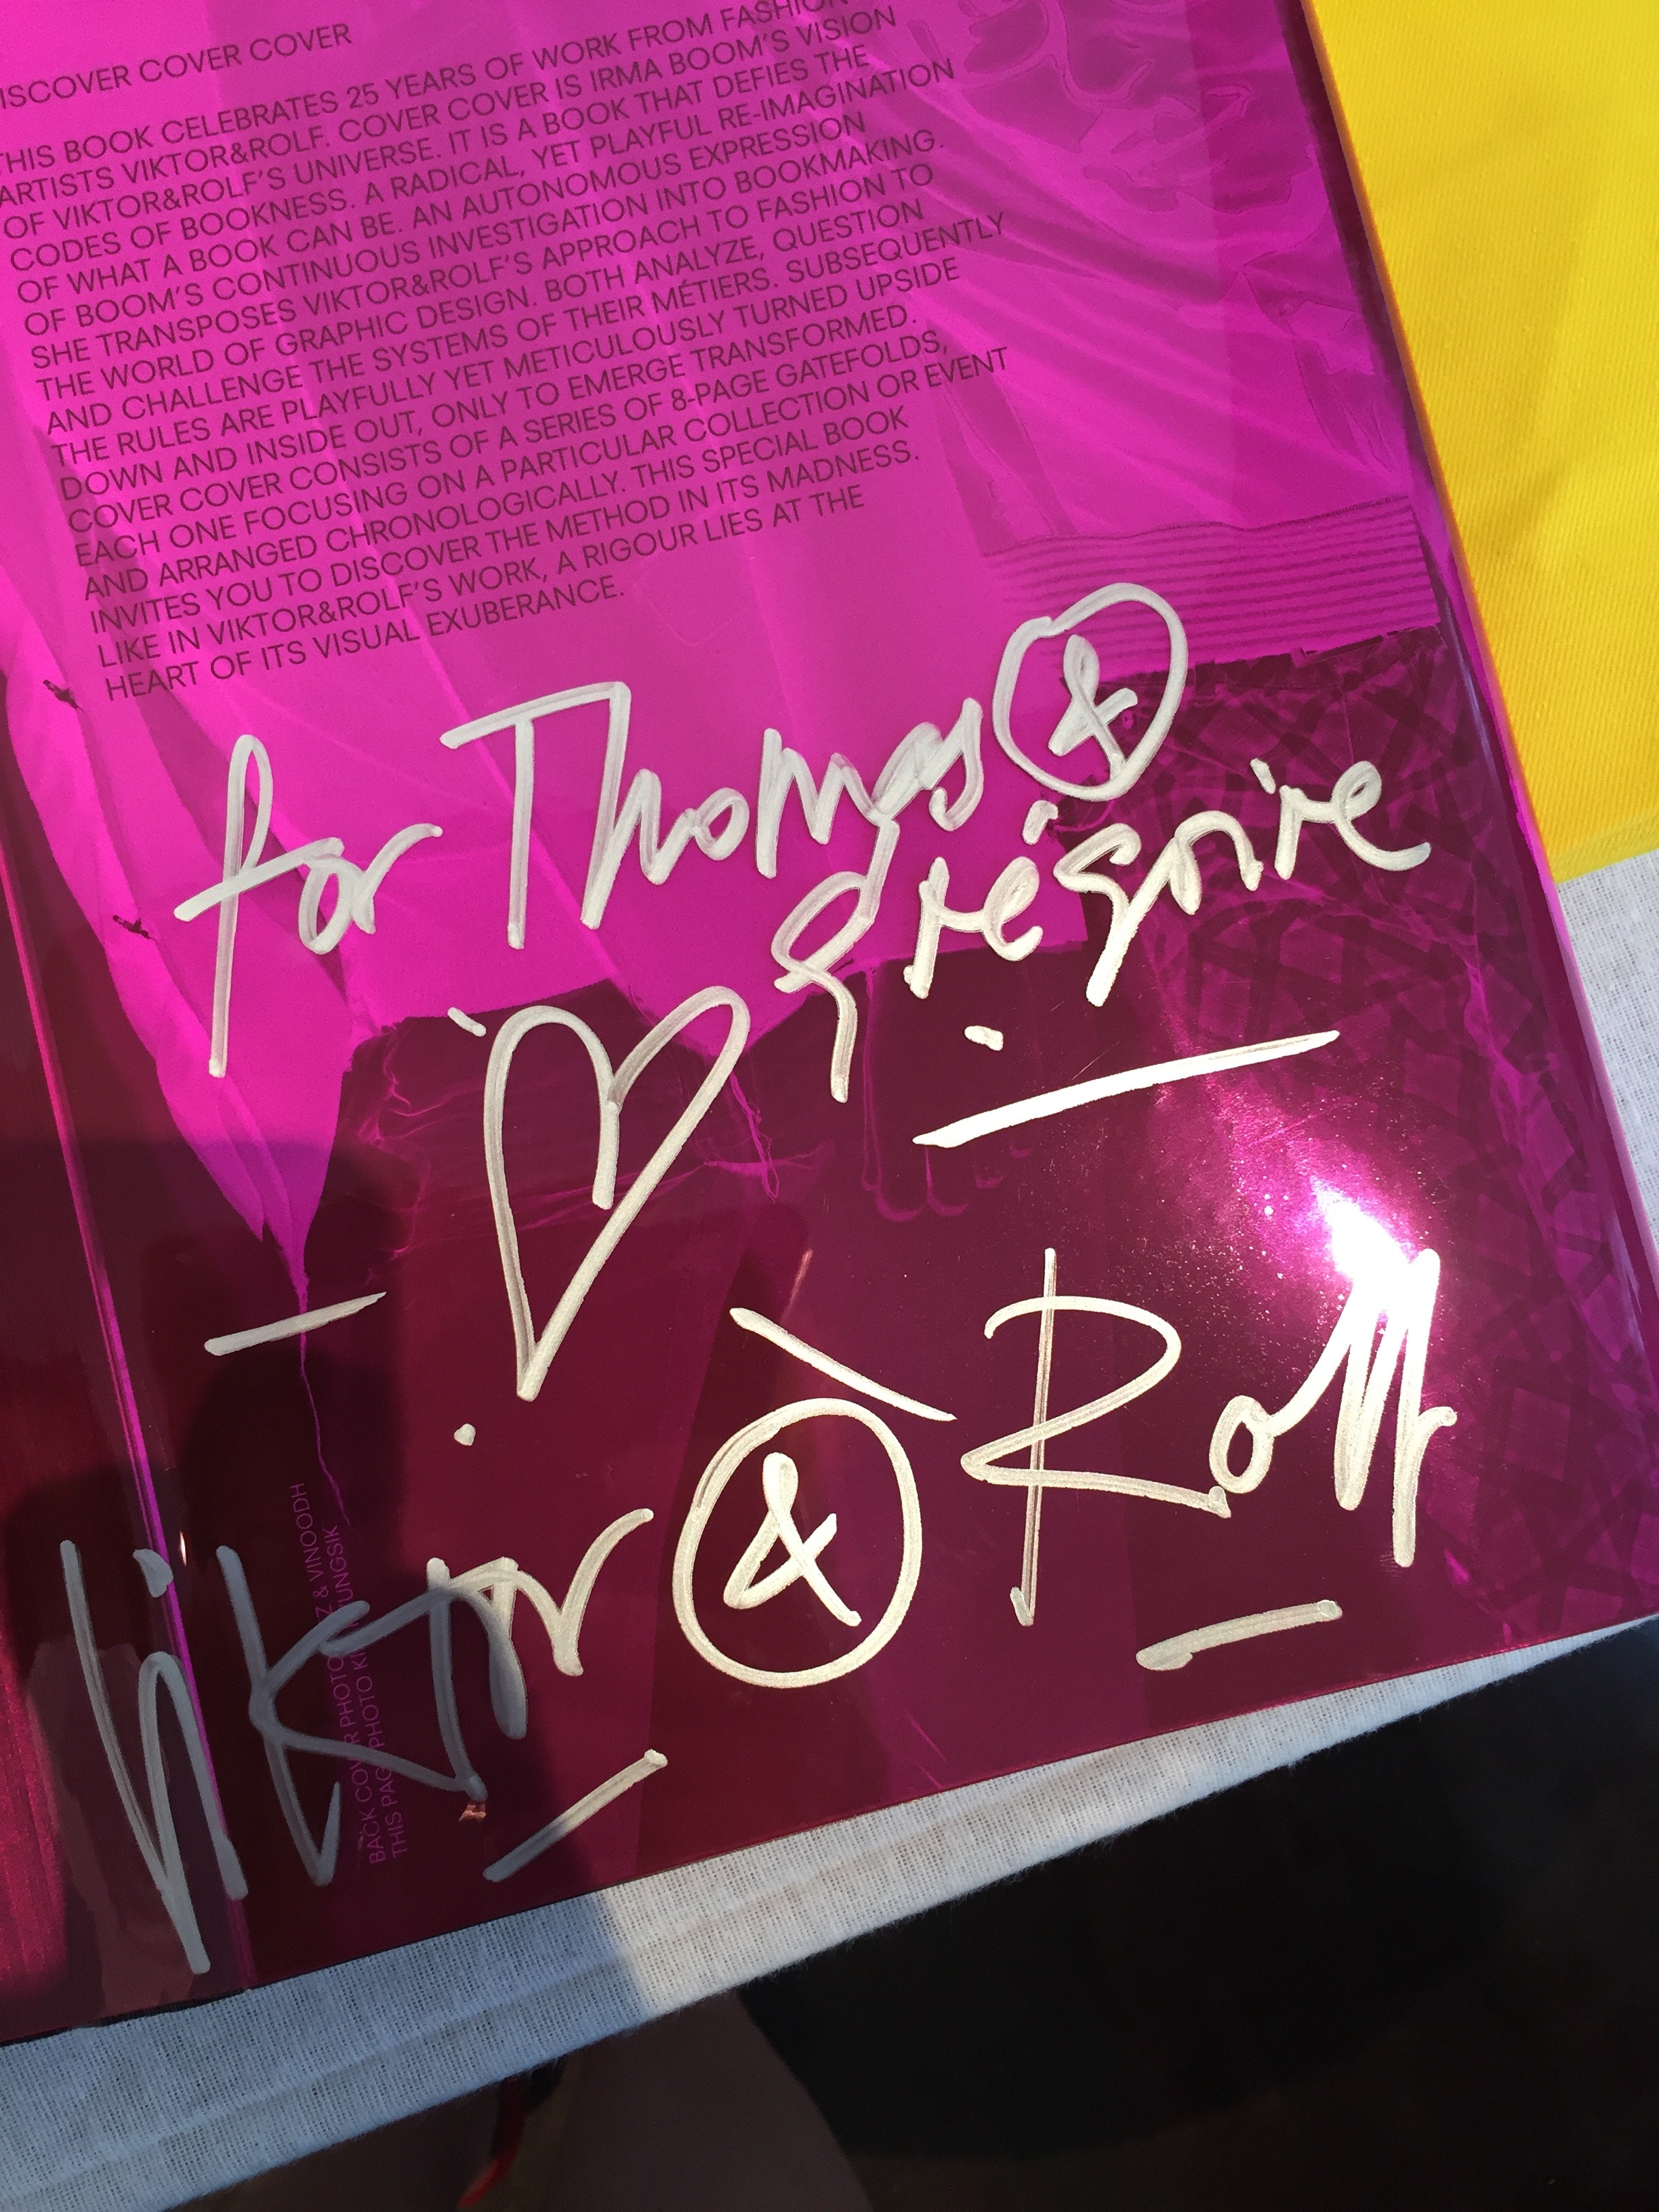 A signed copy of Viktor&Rolf Cover Cover